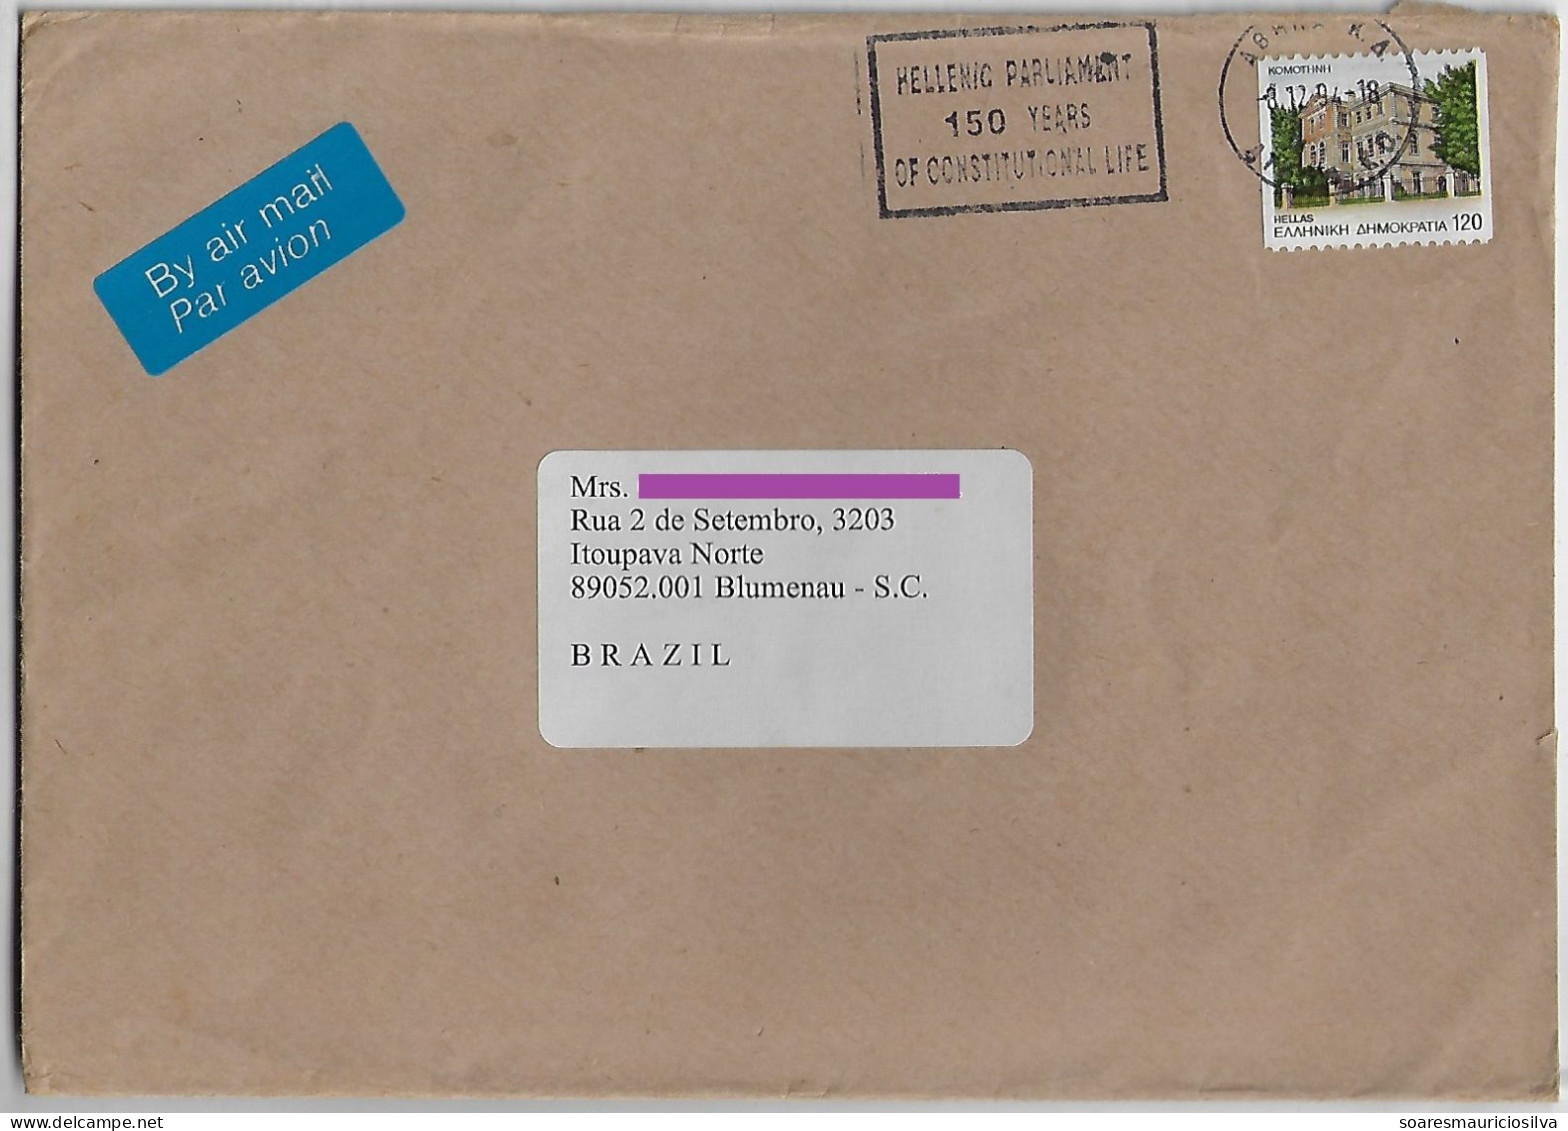 Greece 1994 Airmail Cover Athens To Brazil Stamp Komotini Cancel Hellenic Parliament 150 Years Of Constitucional Life - Covers & Documents